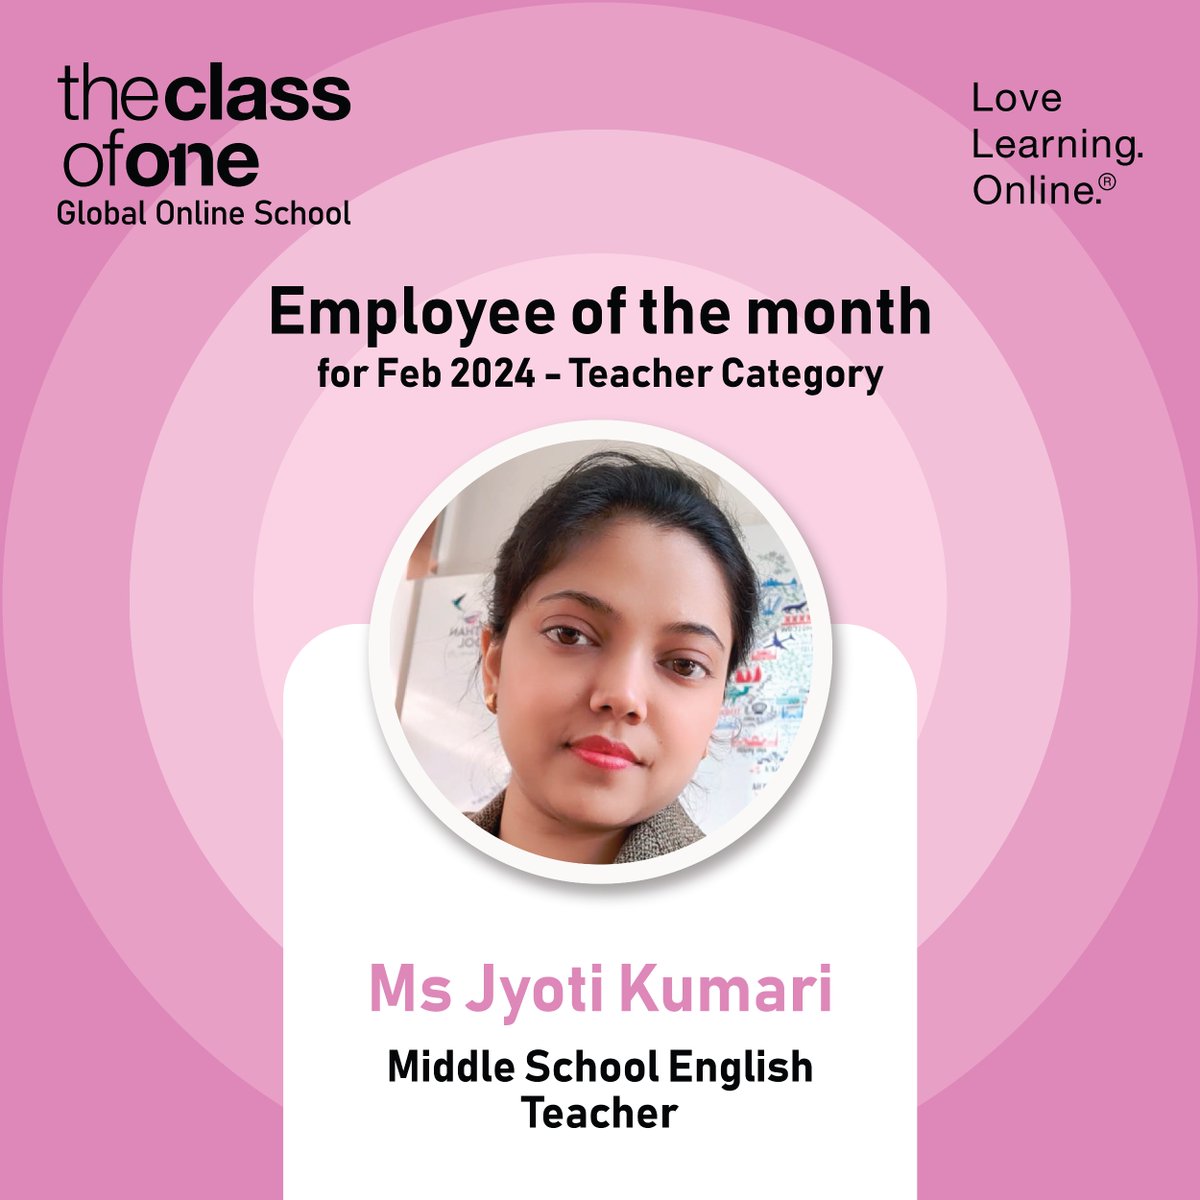 Congratulations to Ms. Jyoti Kumari! Her unwavering dedication and innovative teaching methods in Middle School English have ignited a love for language and literature among students, inspiring them to reach for new heights.

#EmployeeOfTheMonth #OnlineSchool #Eschool